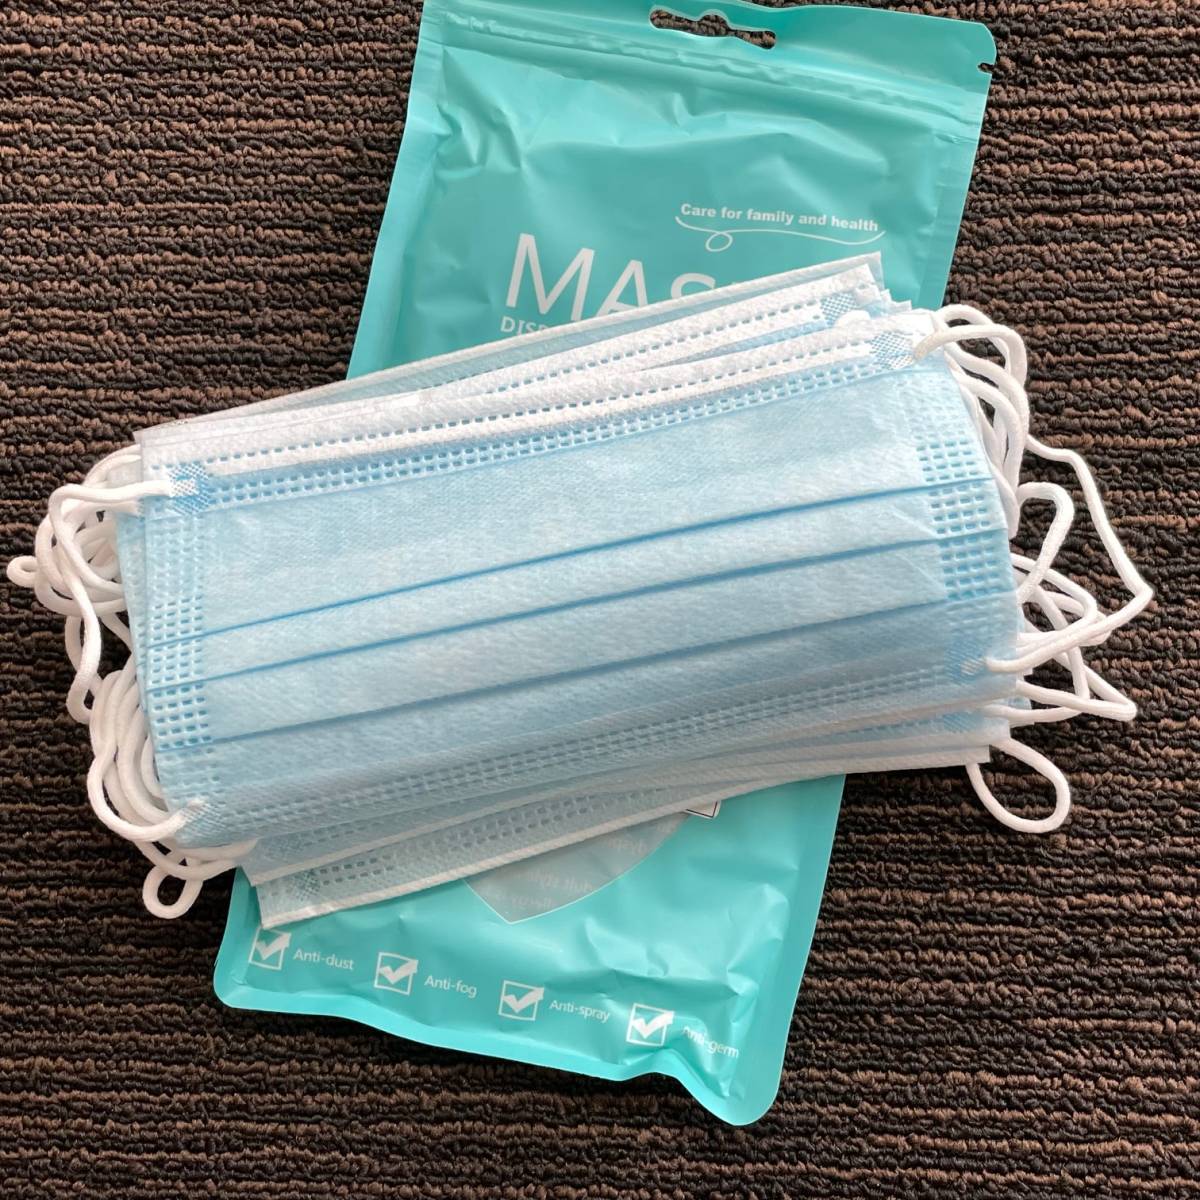  long-term keeping goods 3 layer structure non-woven mask 10 sheets insertion 200 sack set total 2000 sheets together non-woven mask large amount summarize 1 jpy from selling out 